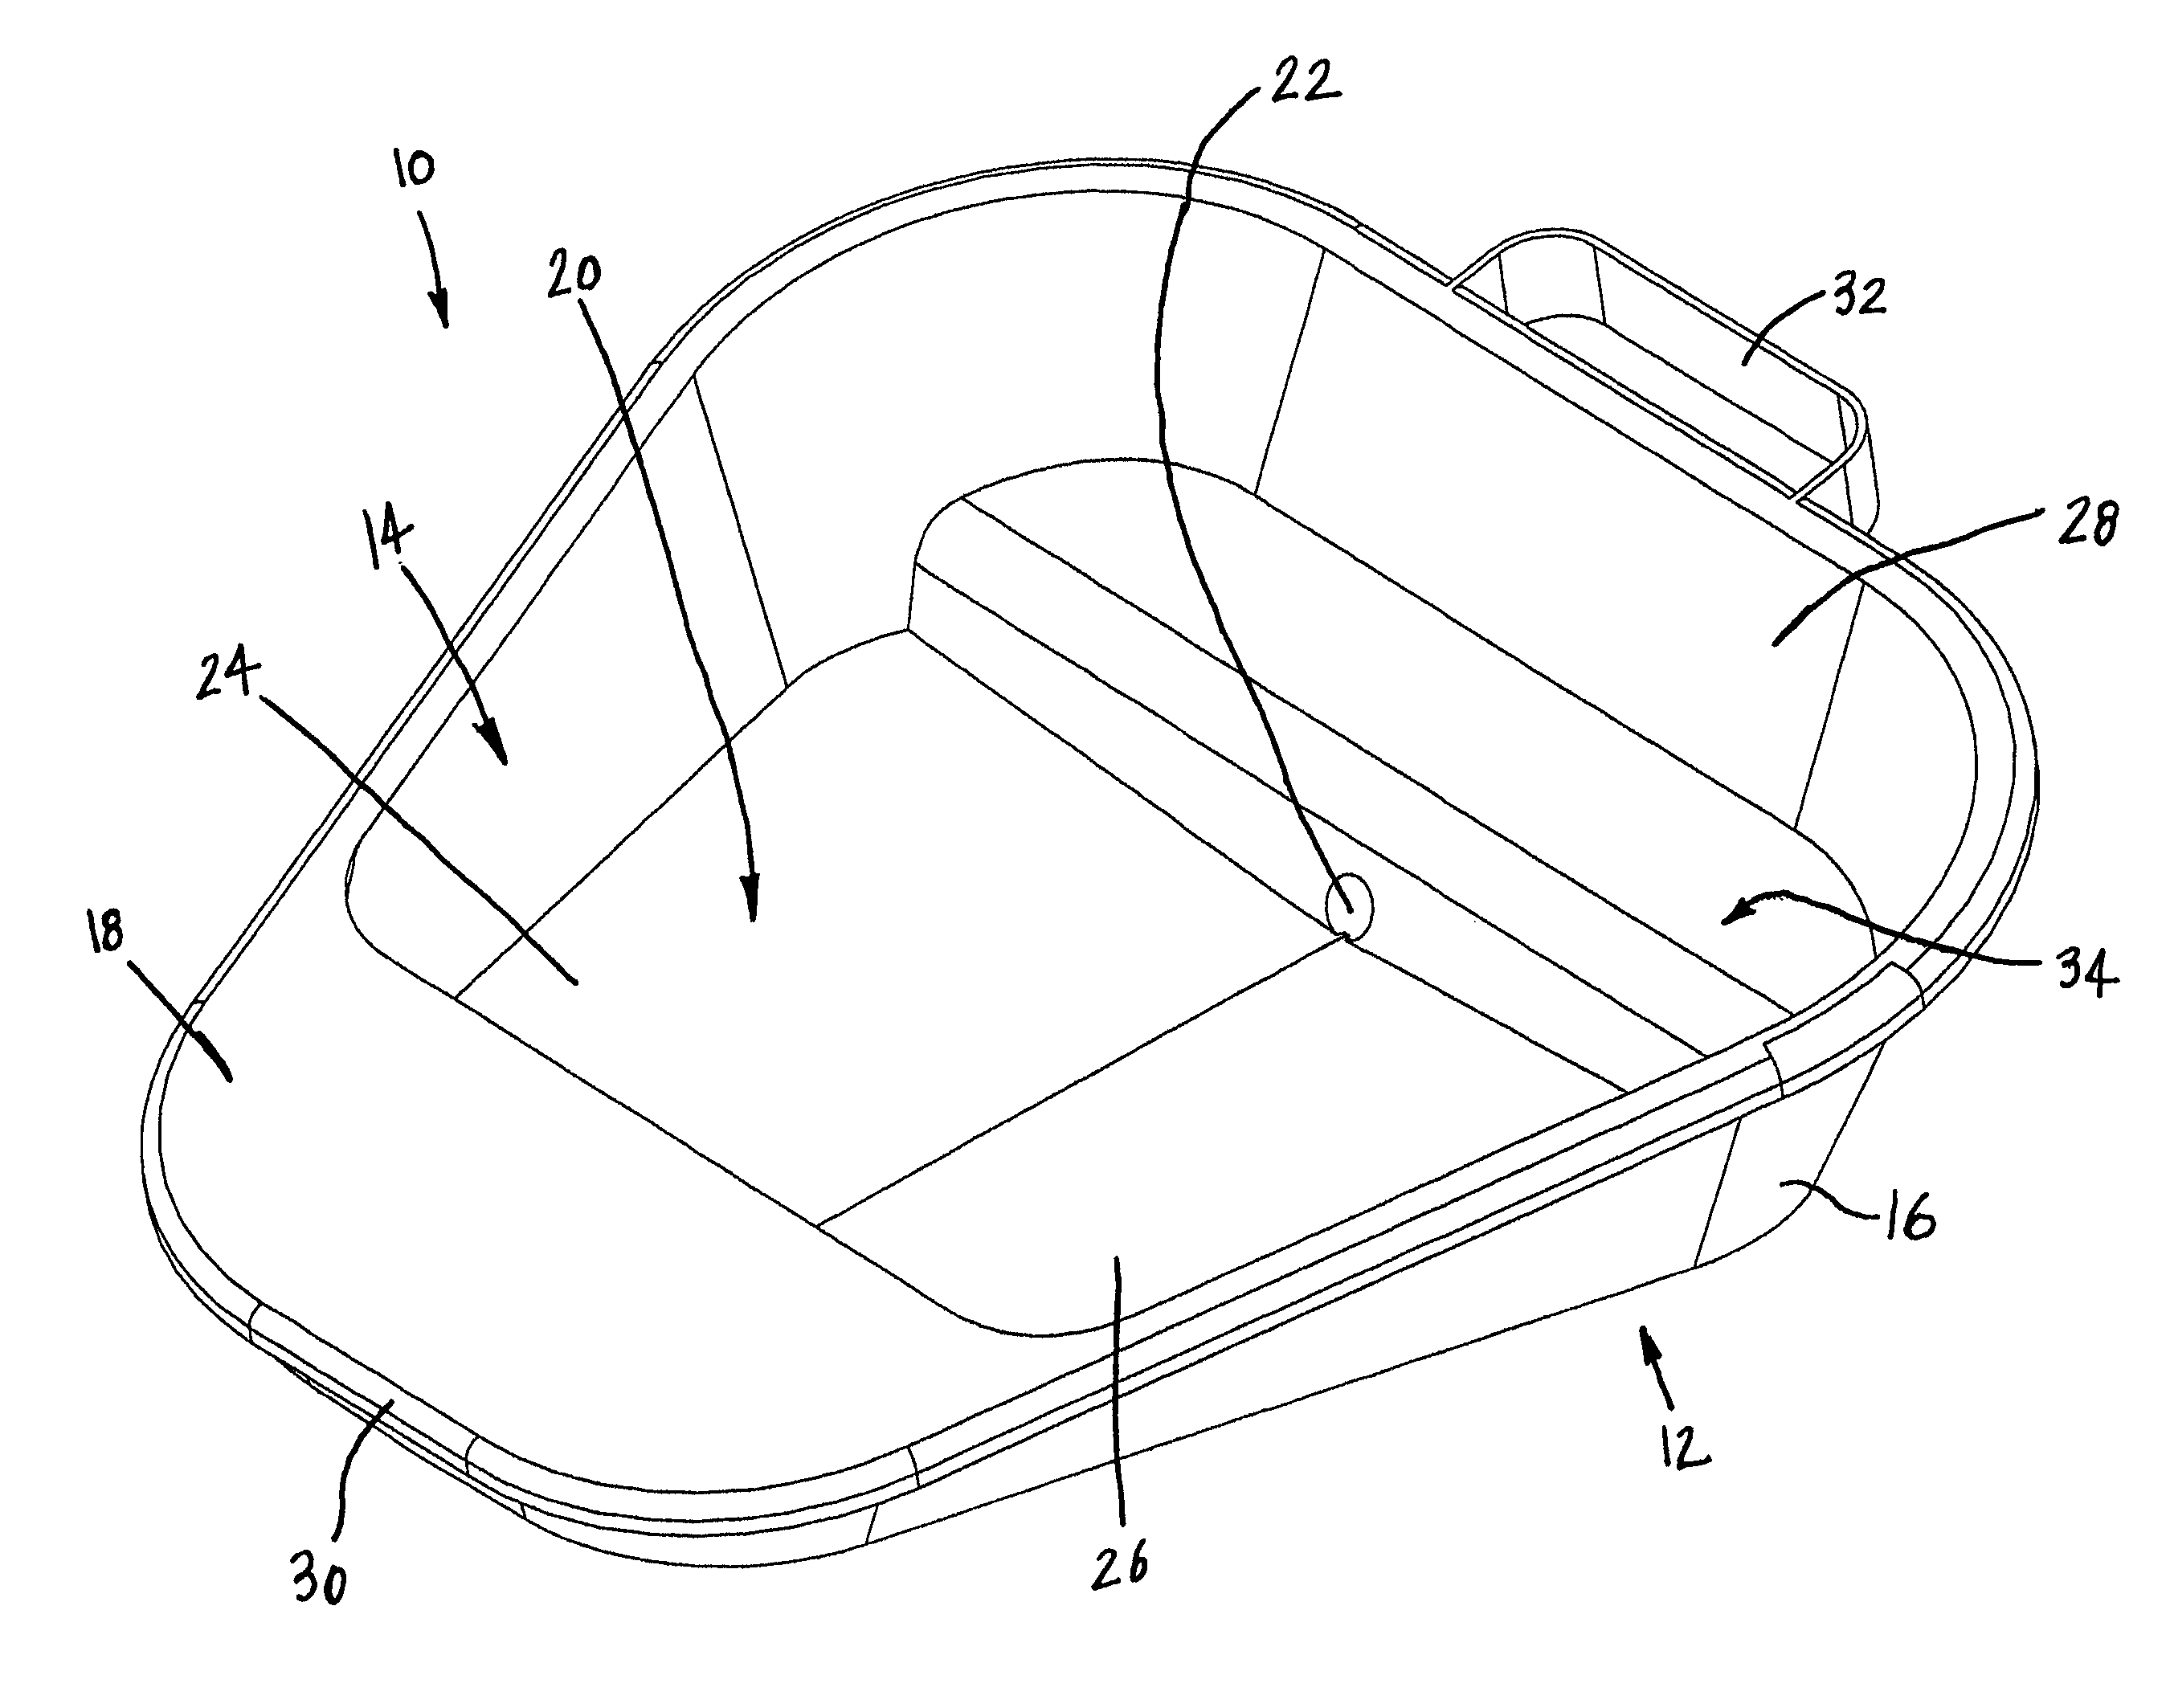 Bedpan having a tapered interior